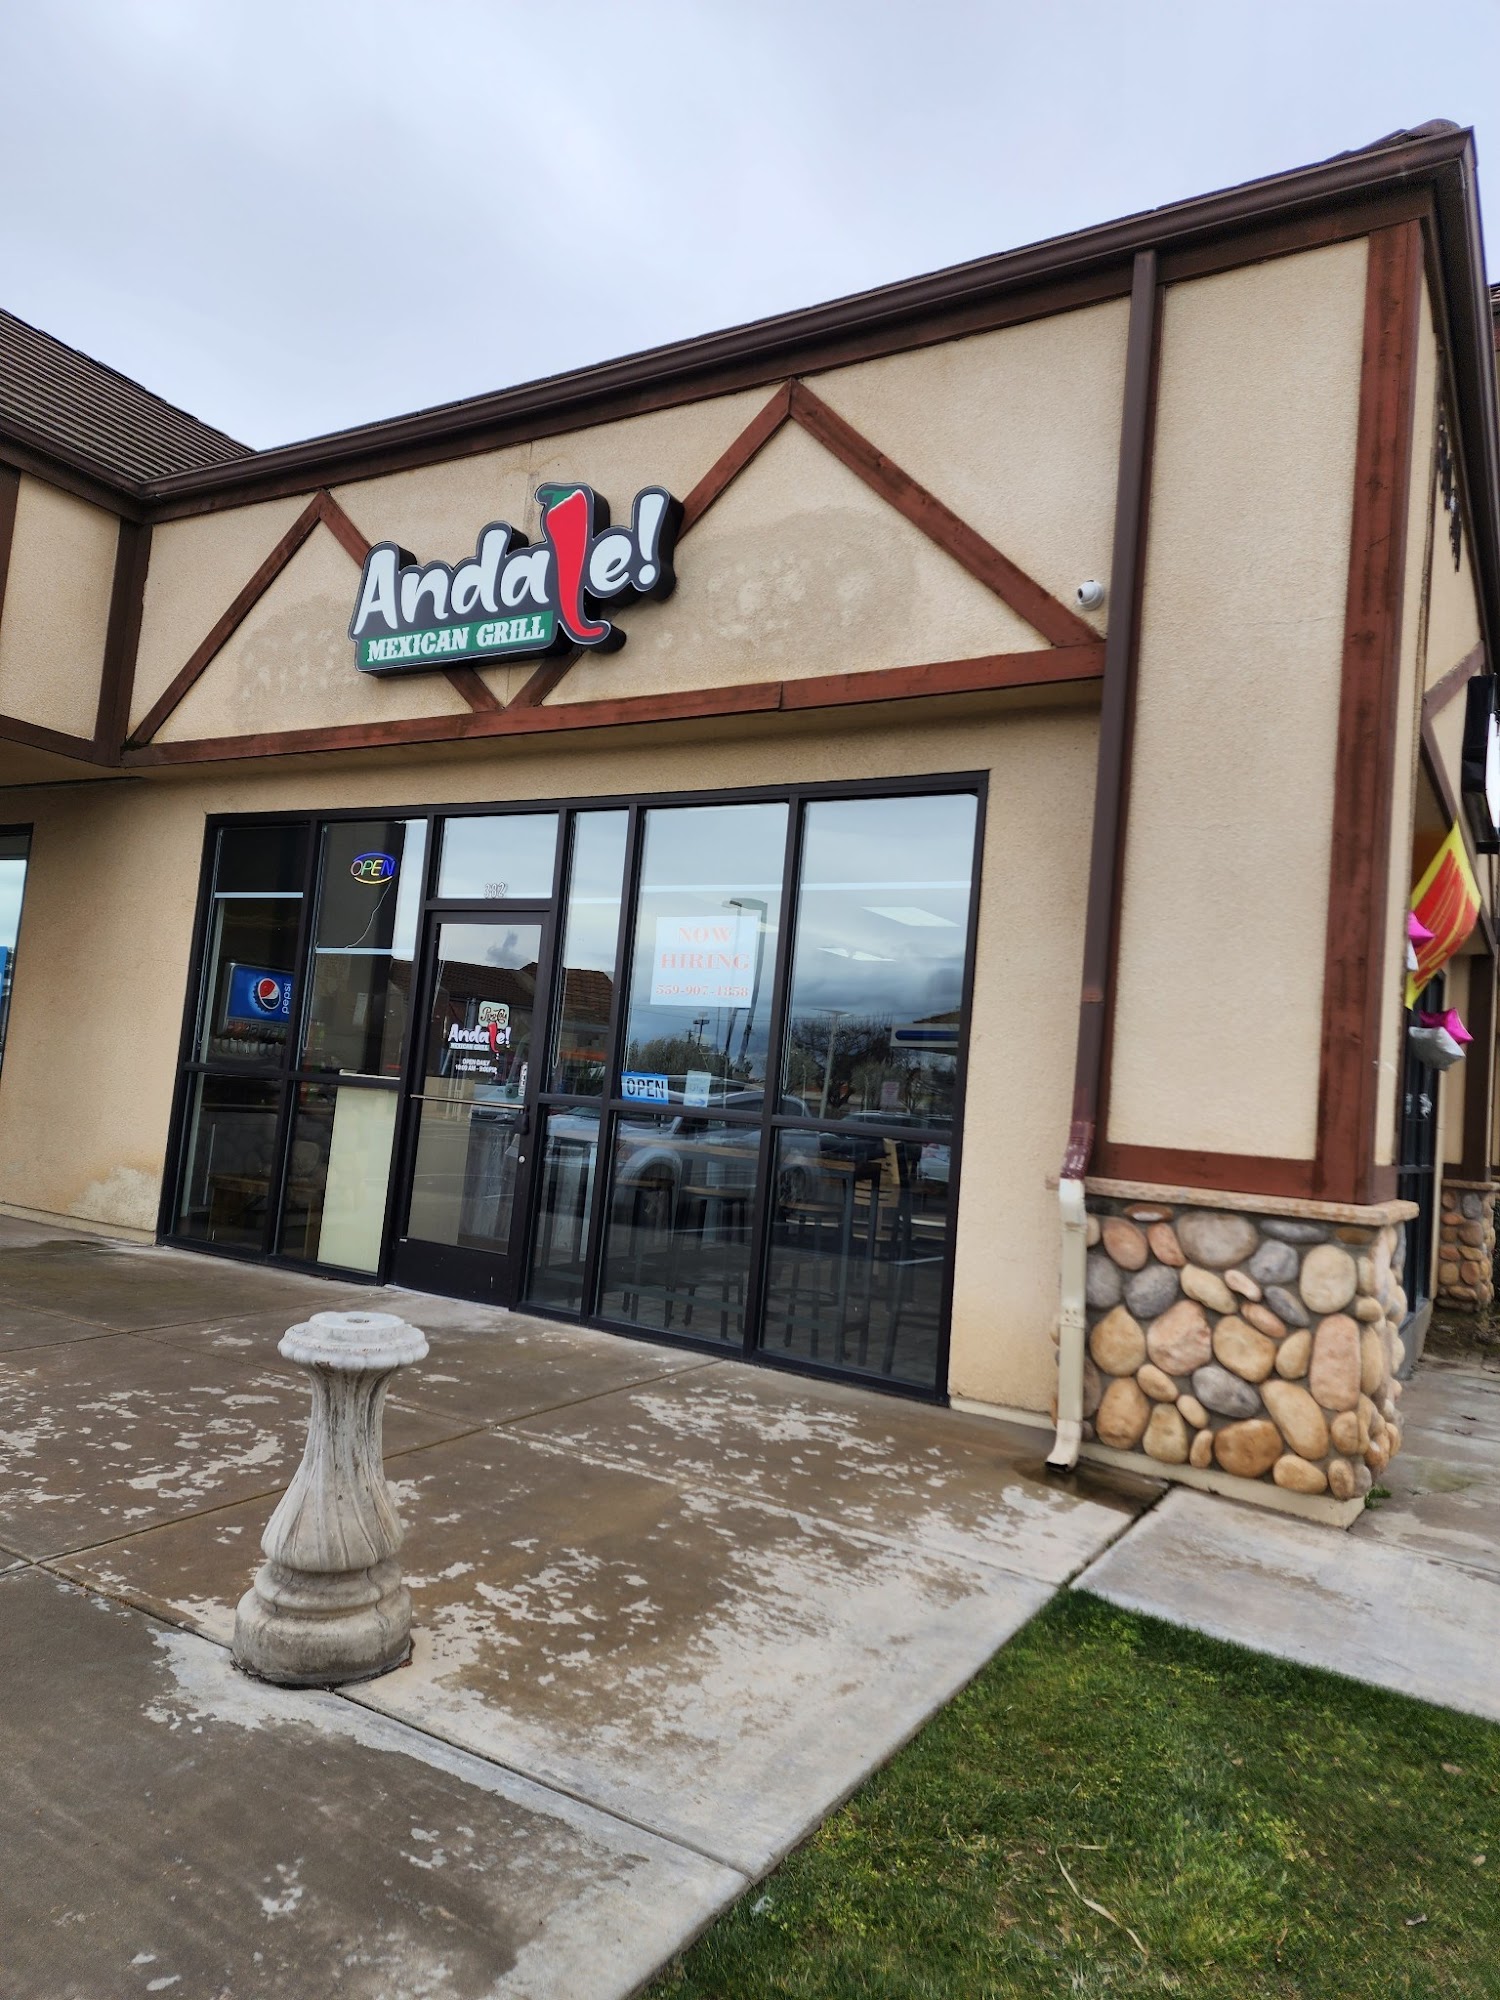 Andale Mexican Grill